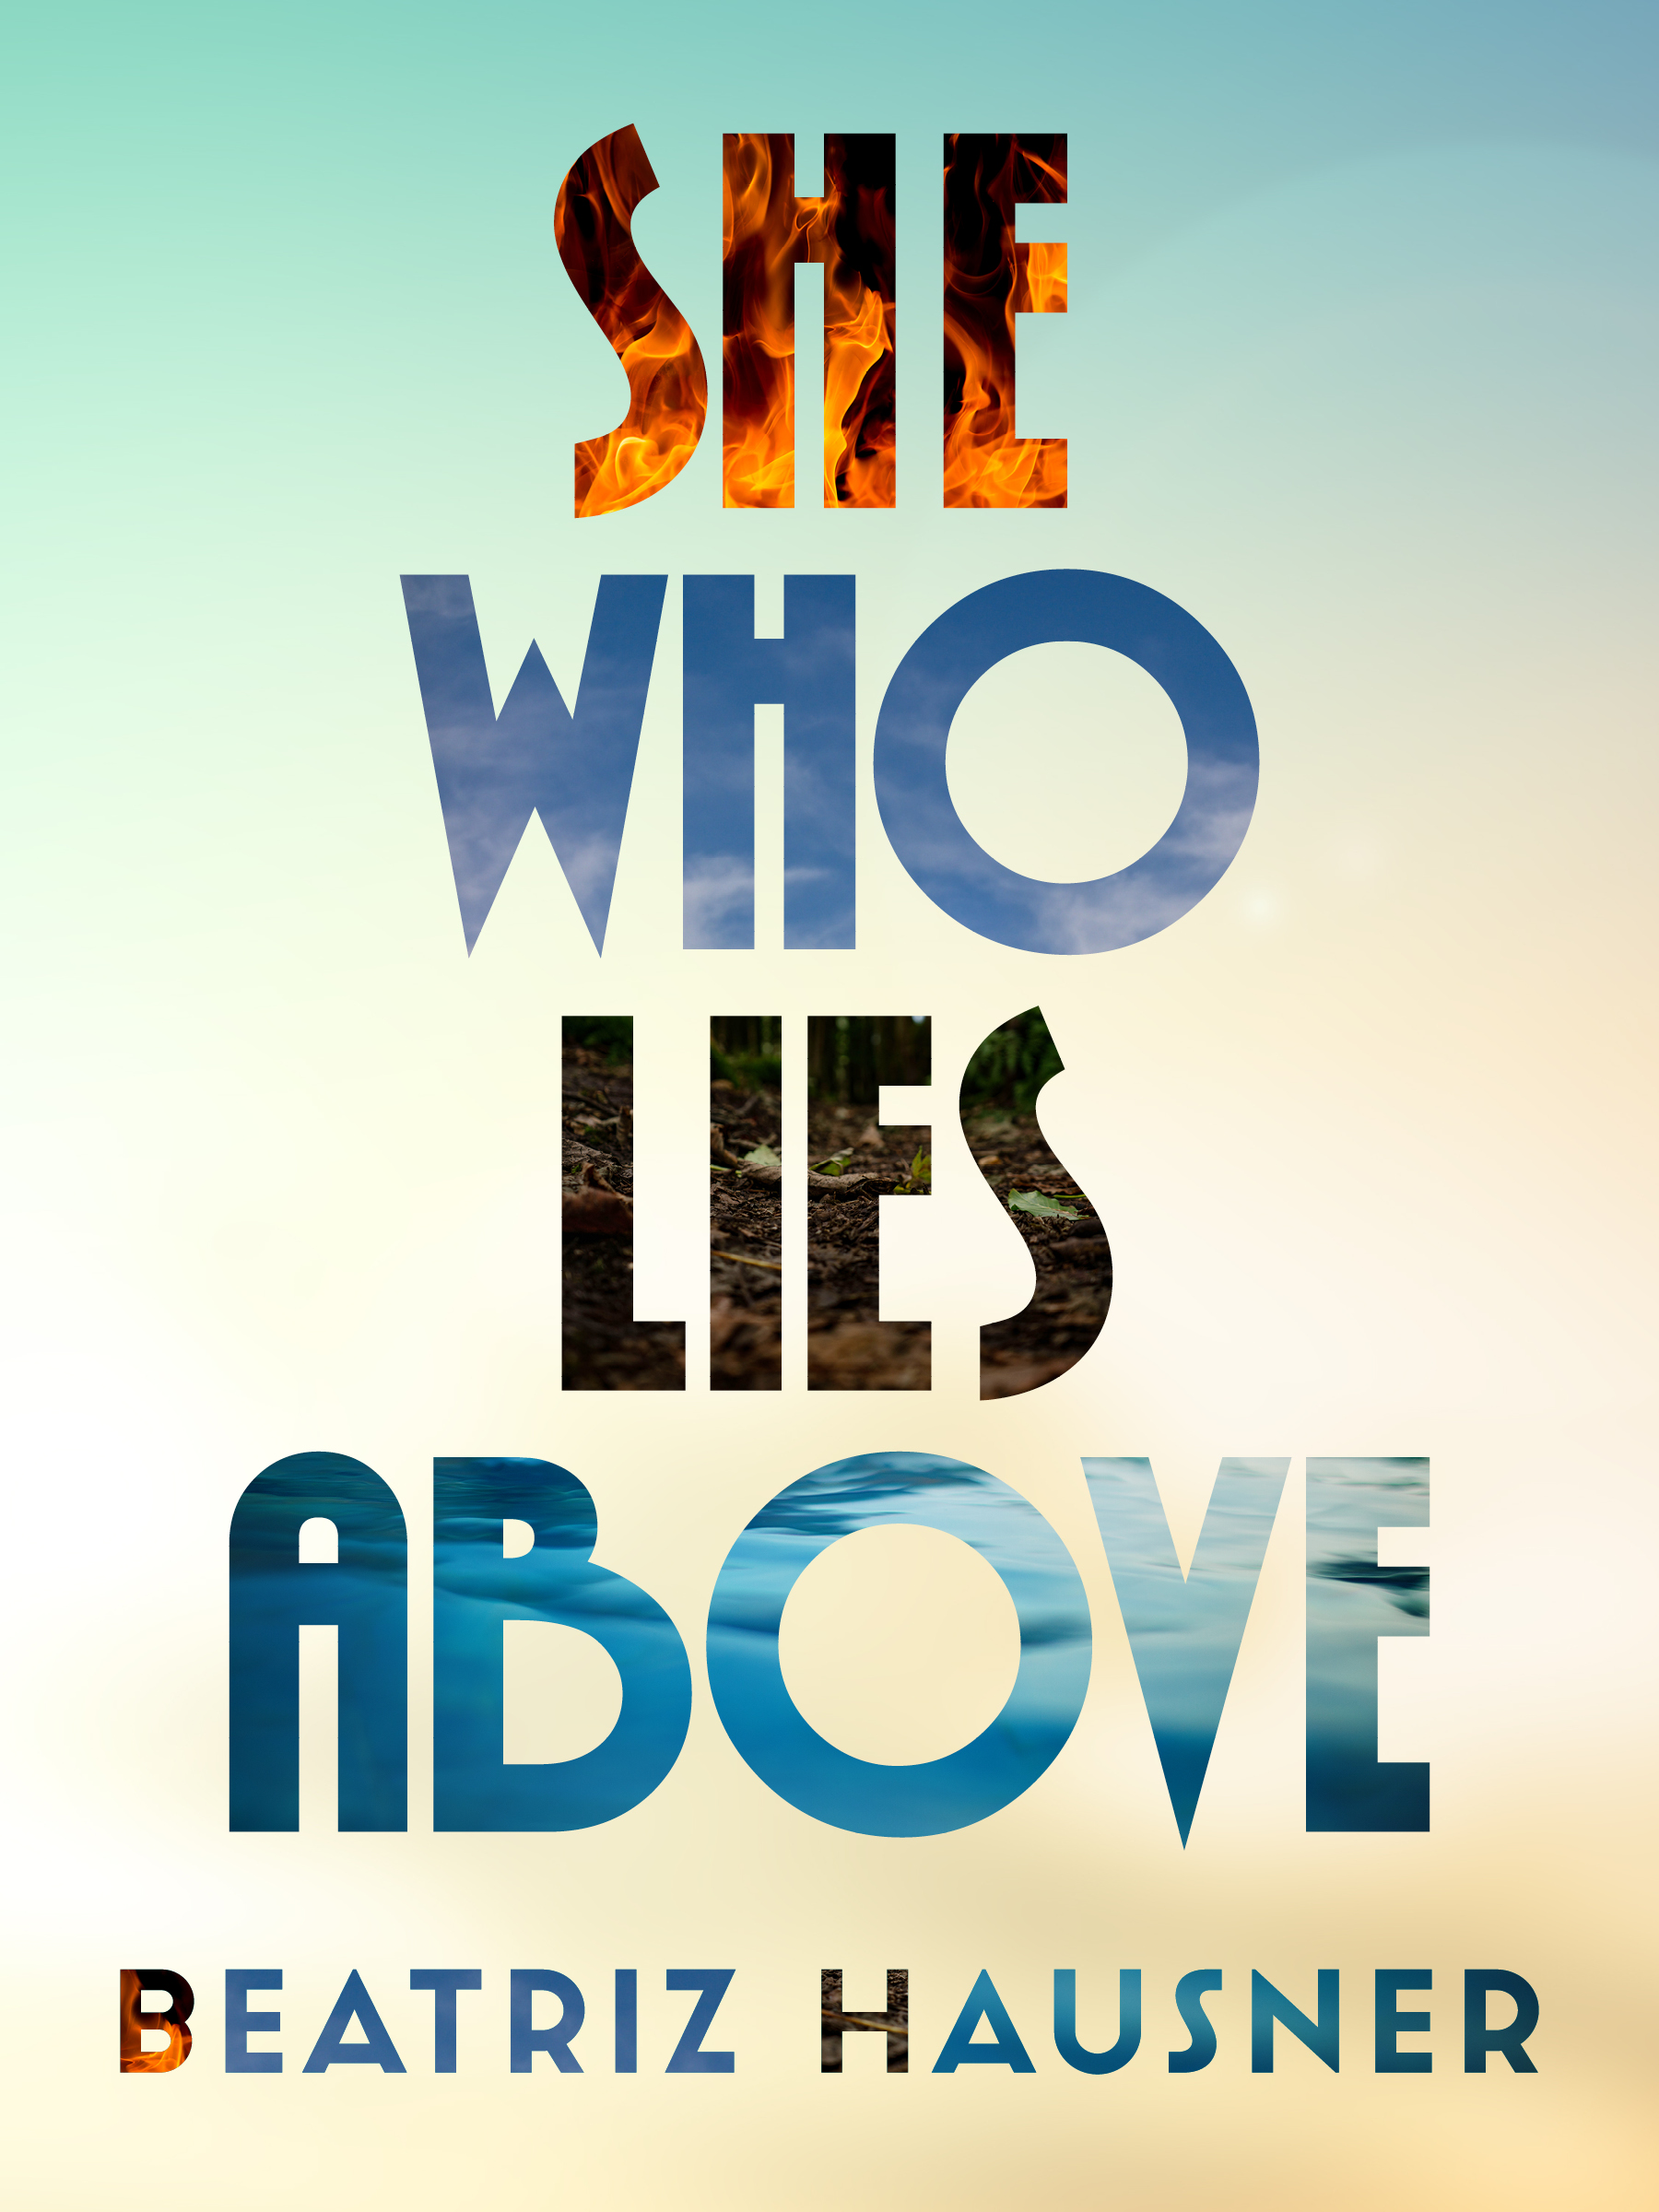 She Who Lies Above by Beatriz Hausner.